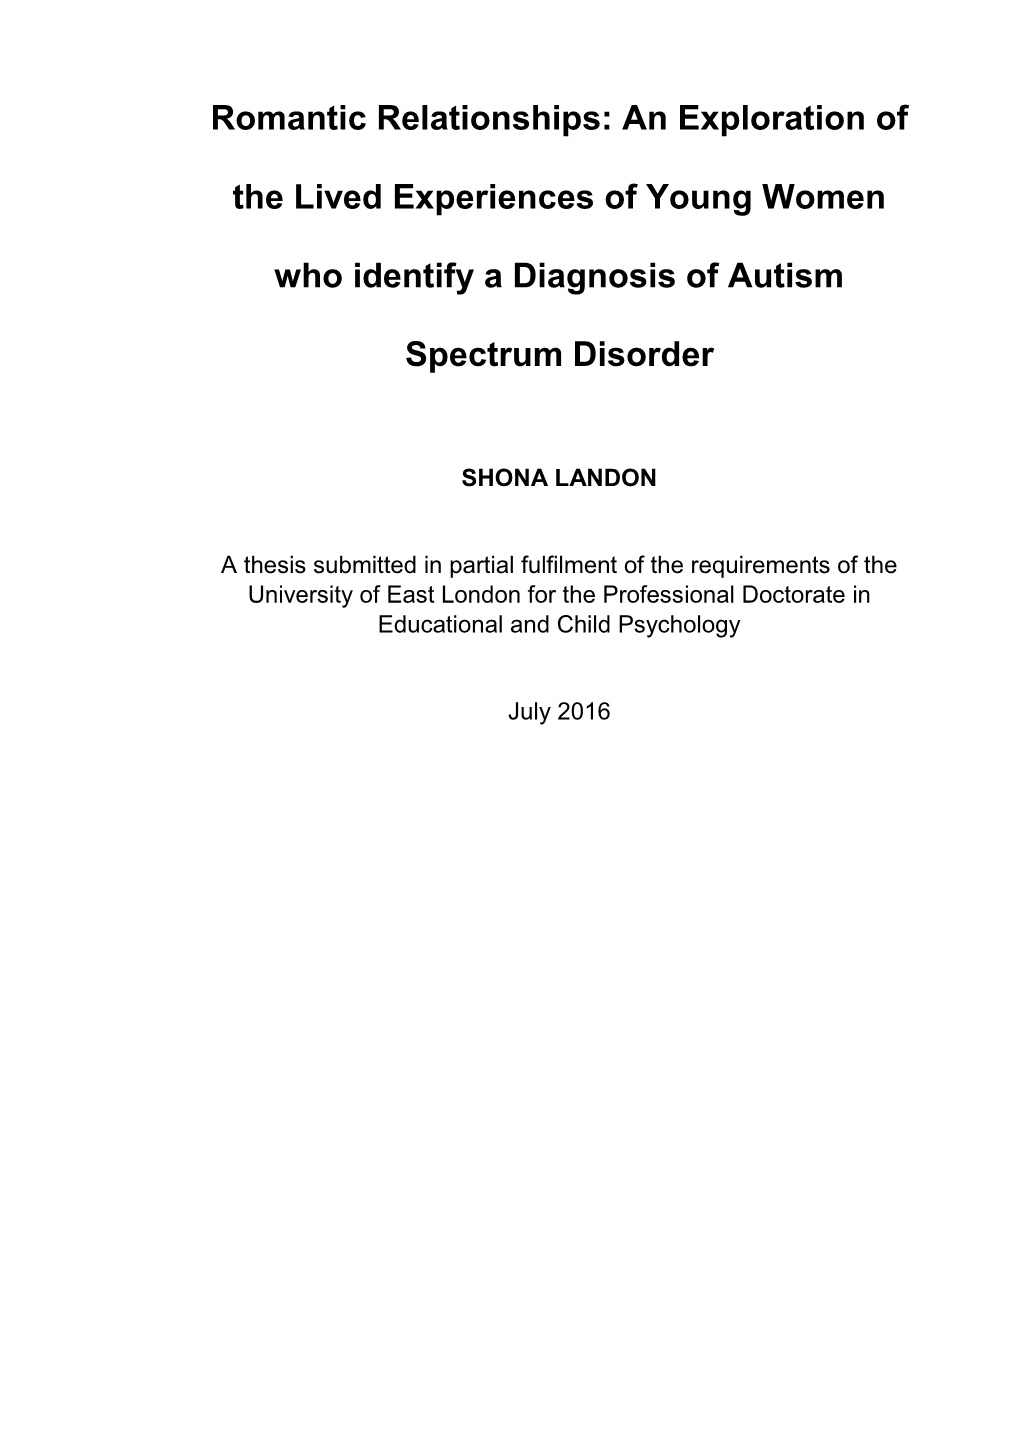 Romantic Relationships: an Exploration of the Lived Experiences of Young Women Who Identify a Diagnosis of Autism Spectrum Disor